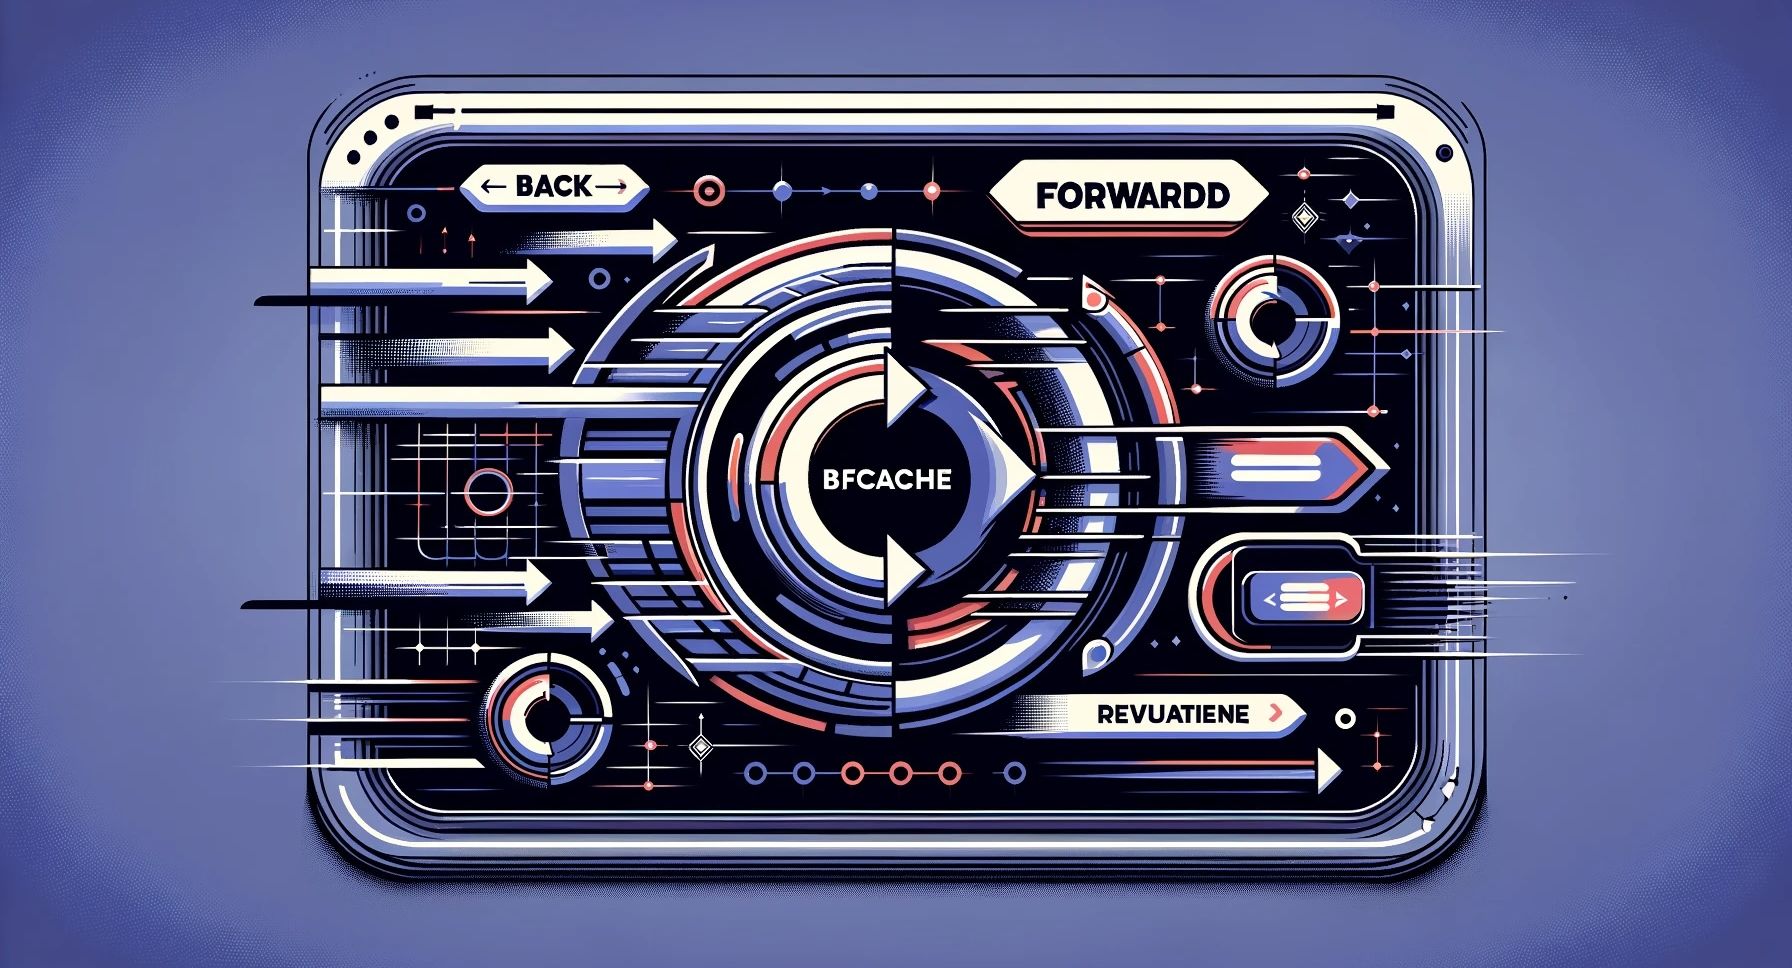 Dive into the world of Back/Forward Cache (bfcache), a groundbreaking browser feature enhancing user experience with instant page loads during back and forward navigation, especially on slower networks or devices.